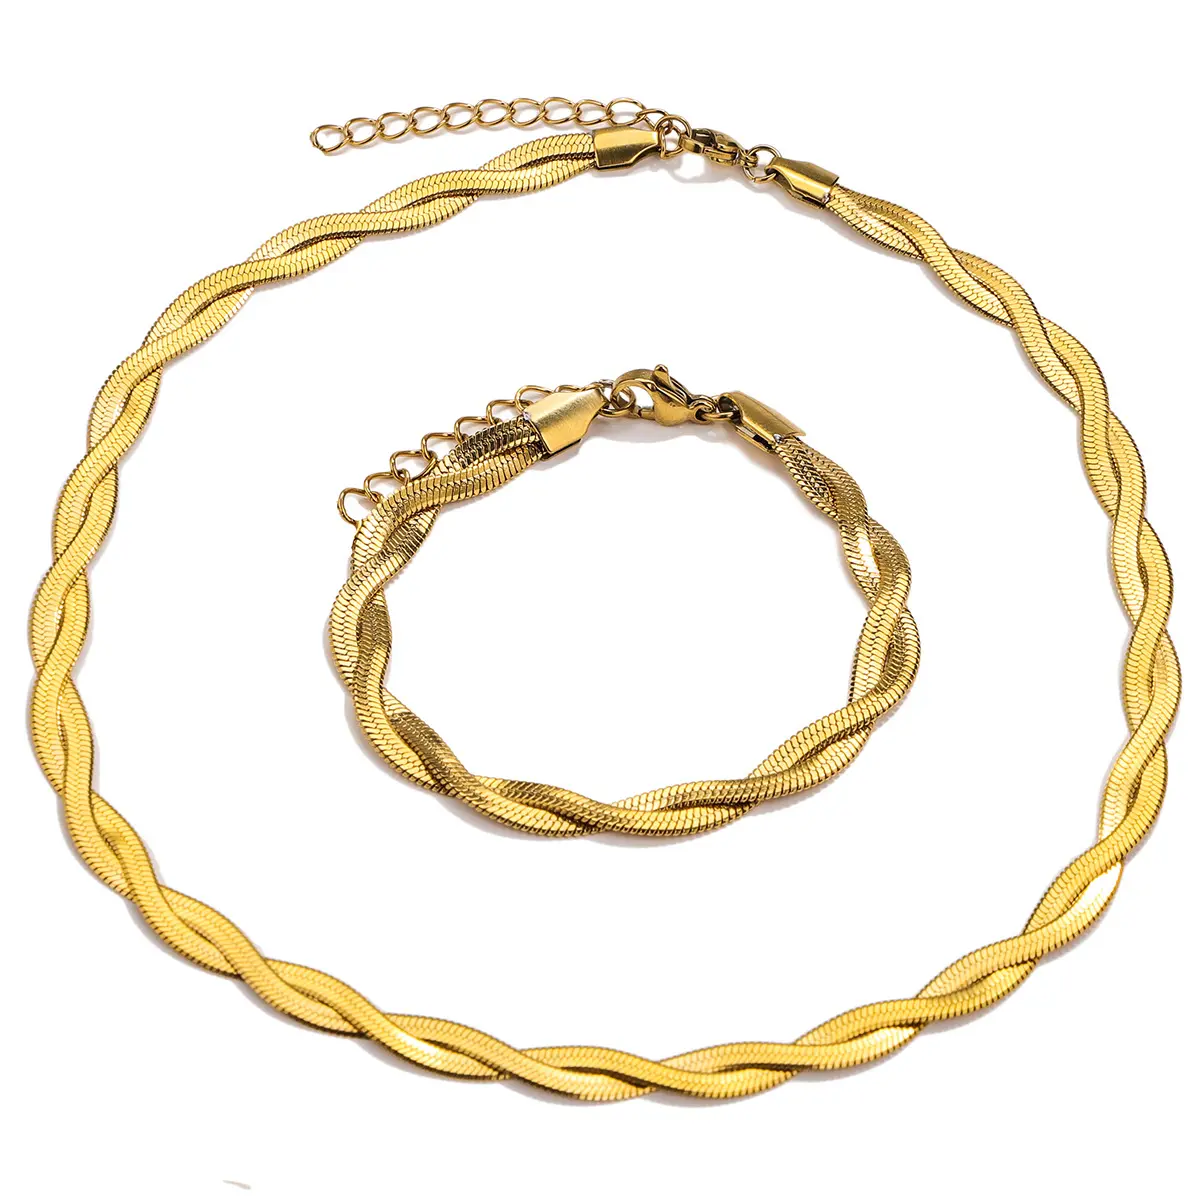 Real 18k Gold Two Tone Double Layer Herringbone Chain Necklace Bracelet Stainless Steel Flat Twist Snake Chain Necklace set